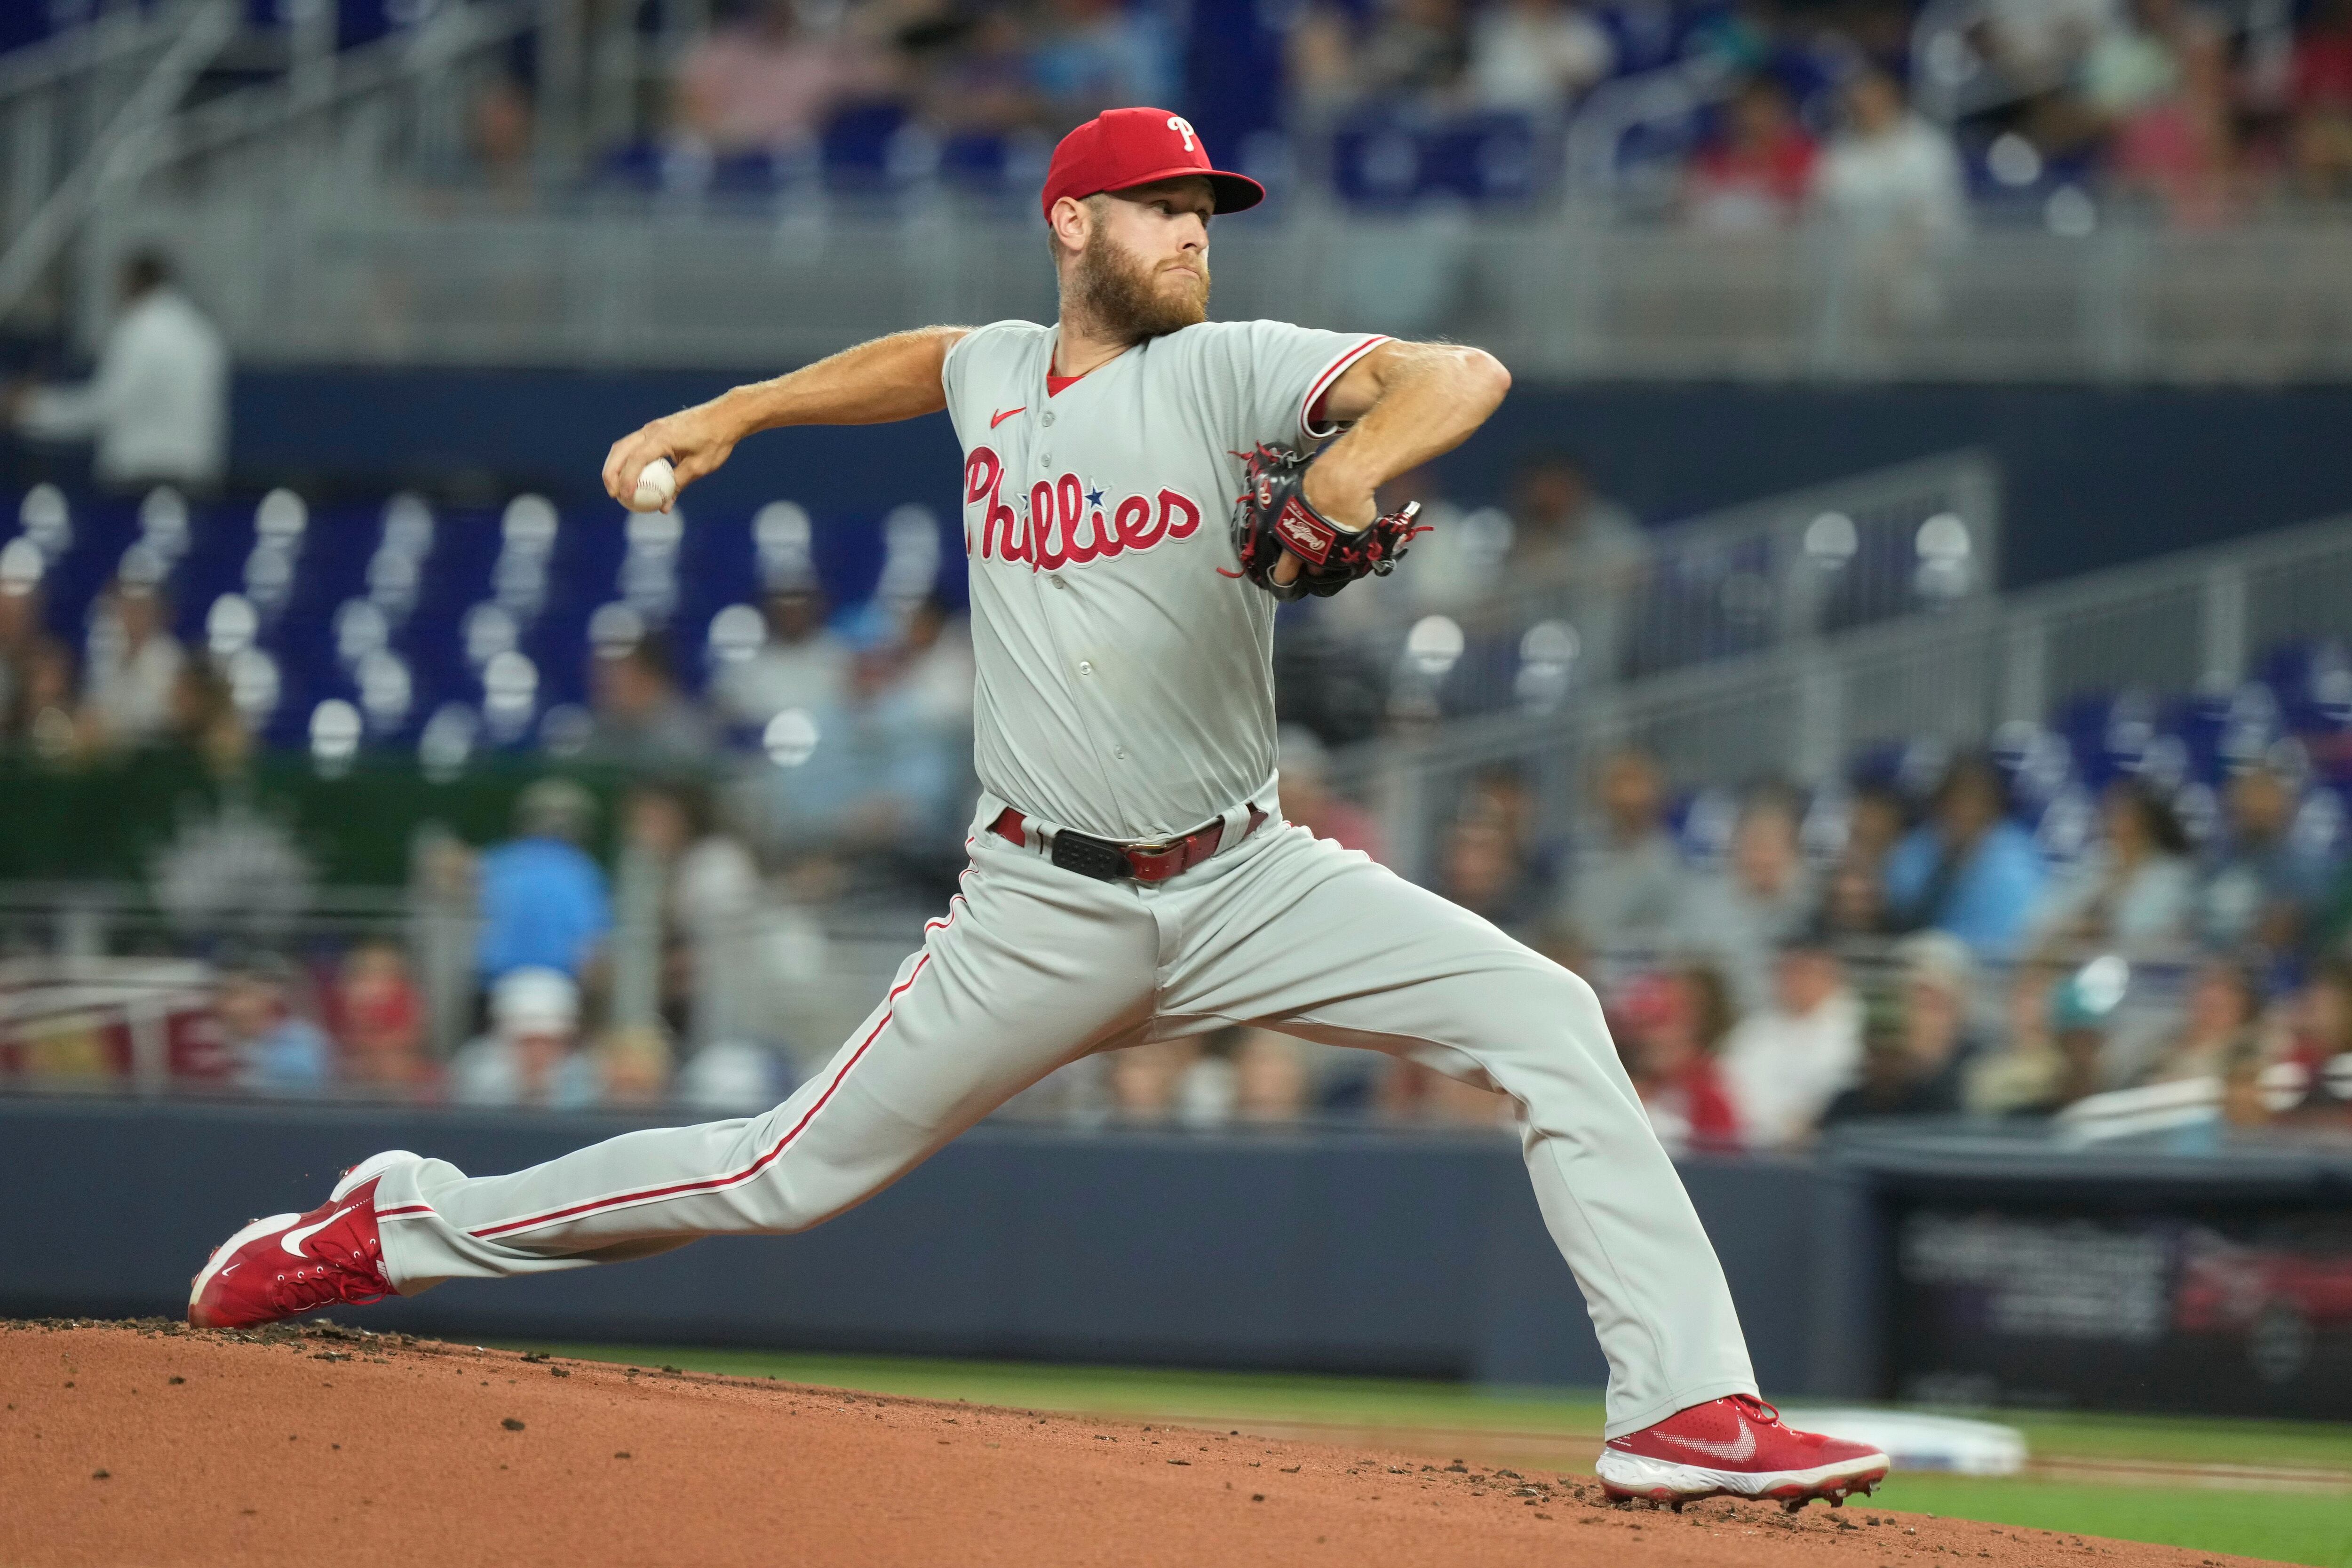 Are Phillies a disappointment through first half of season?